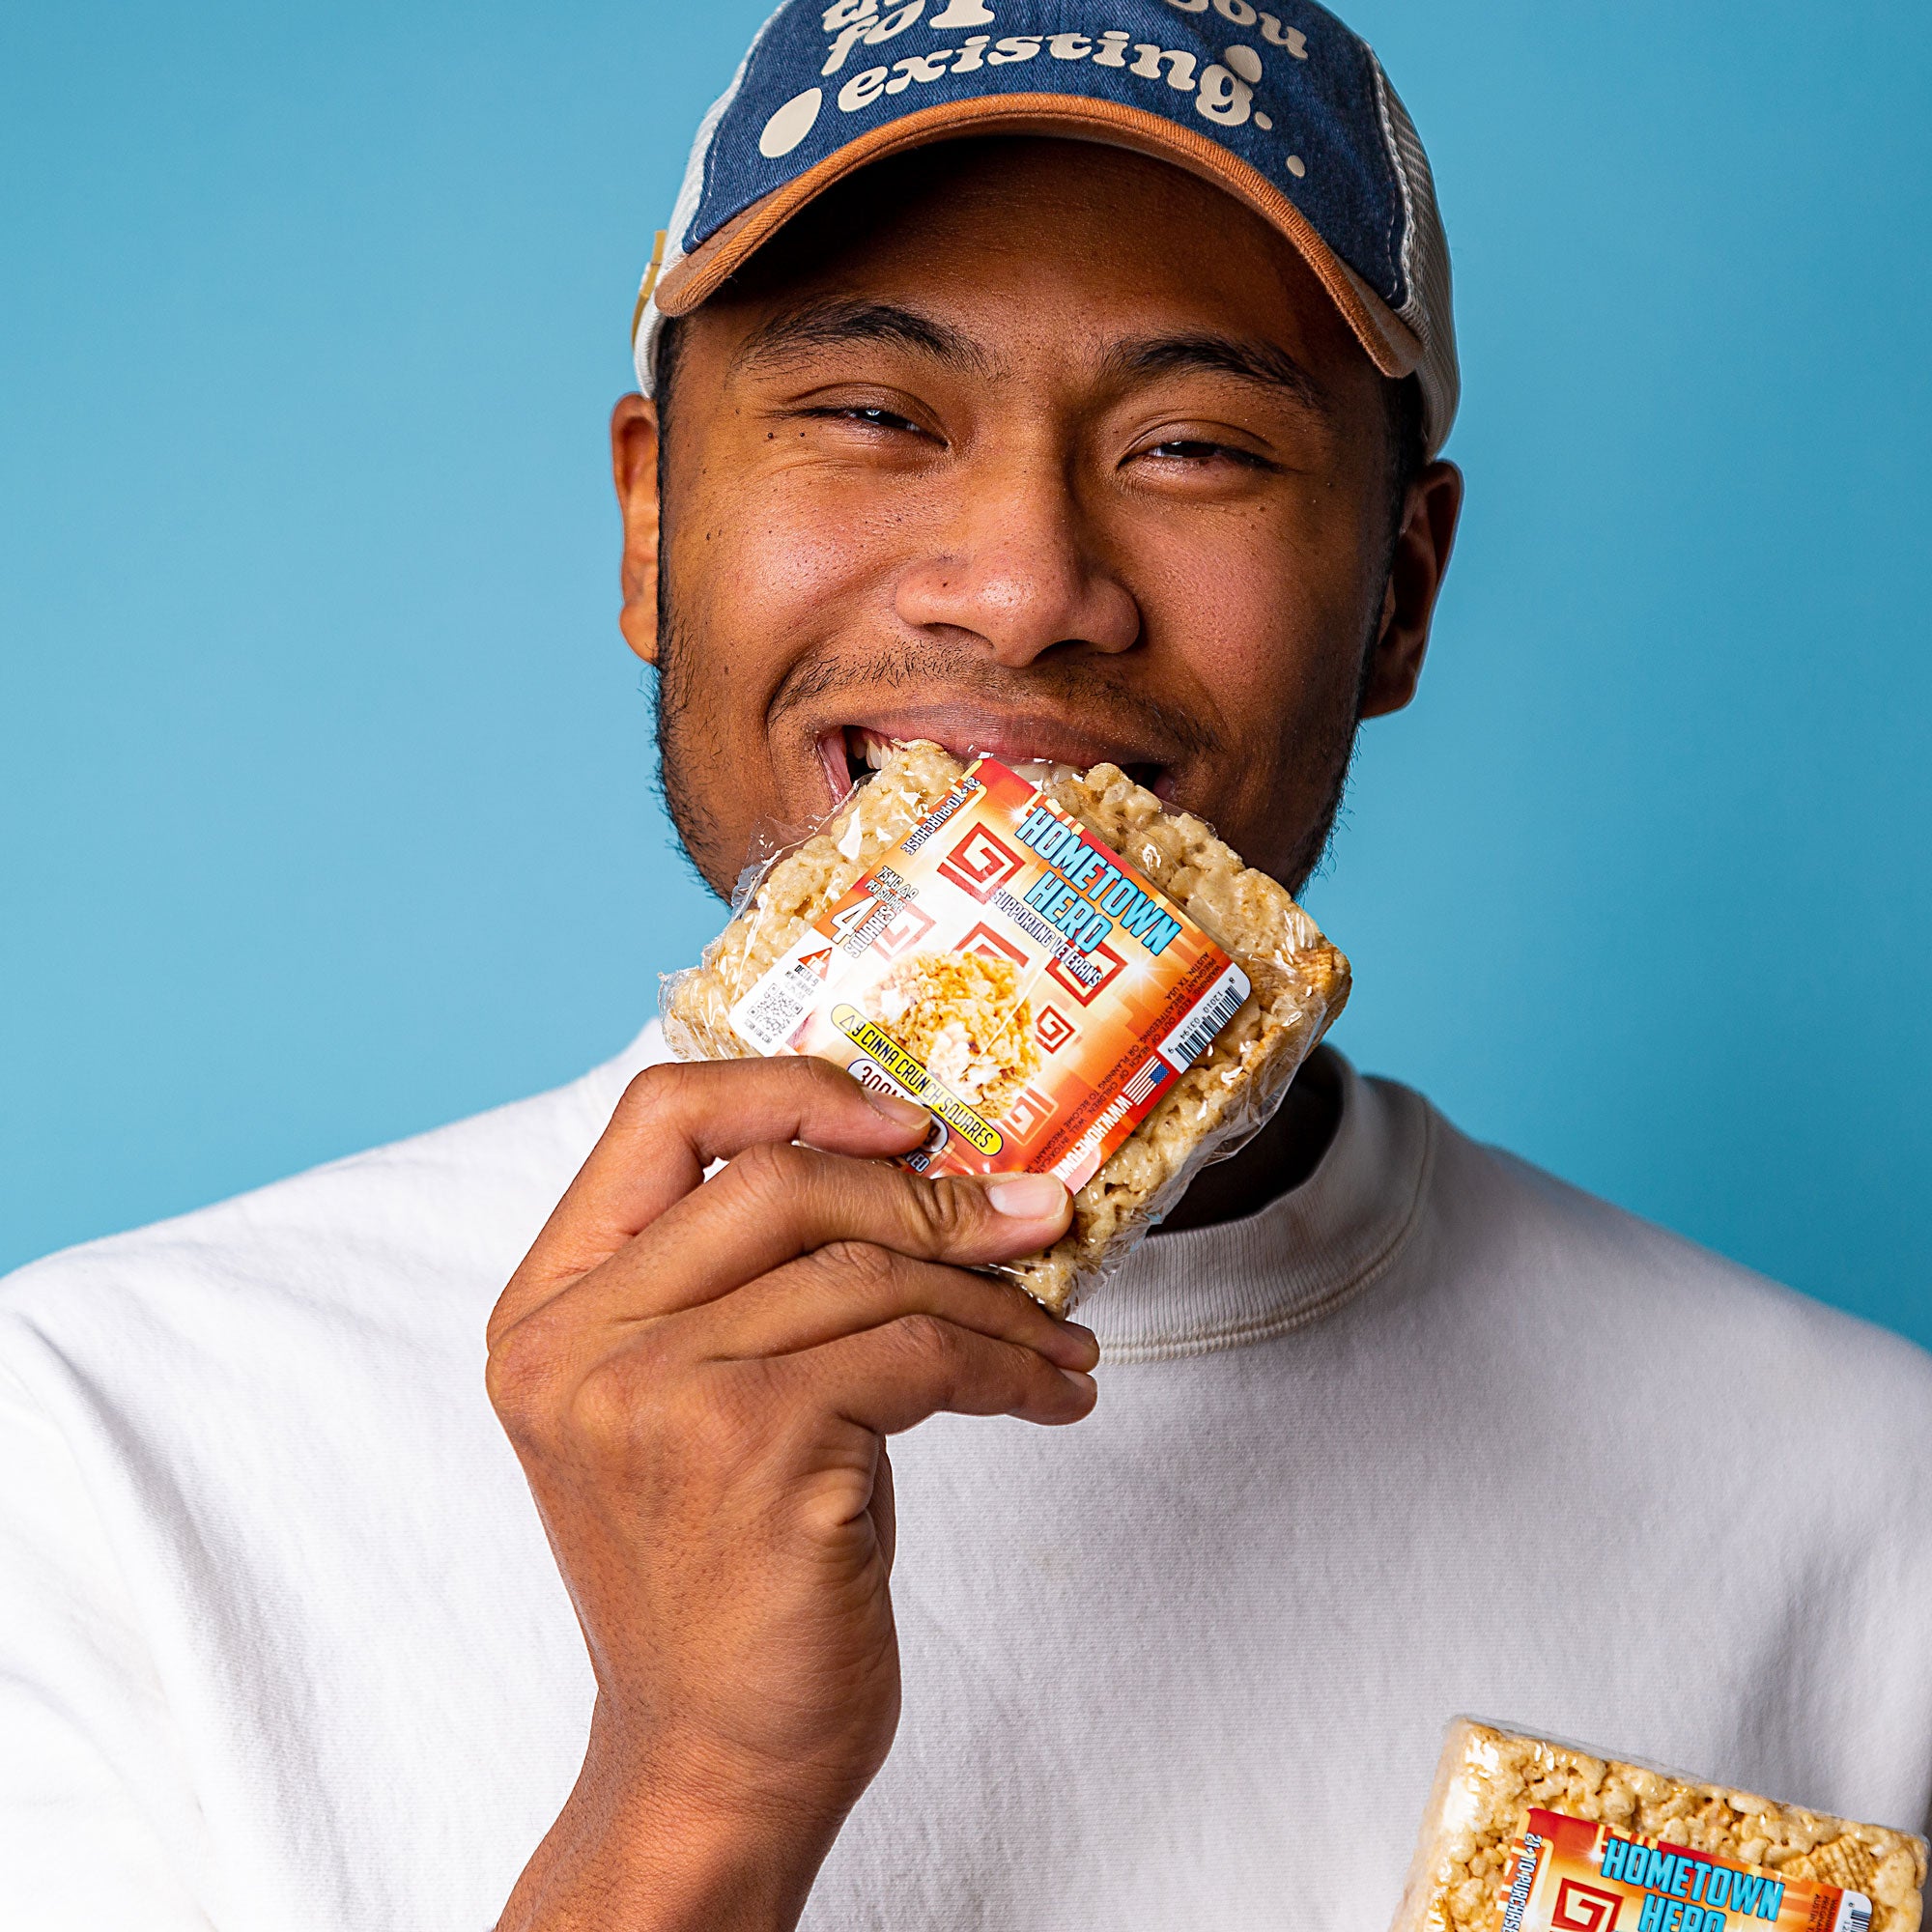 Buy 4 Get 1 FREE Delta 9 Cinna Crunch Squares with model (King) eating